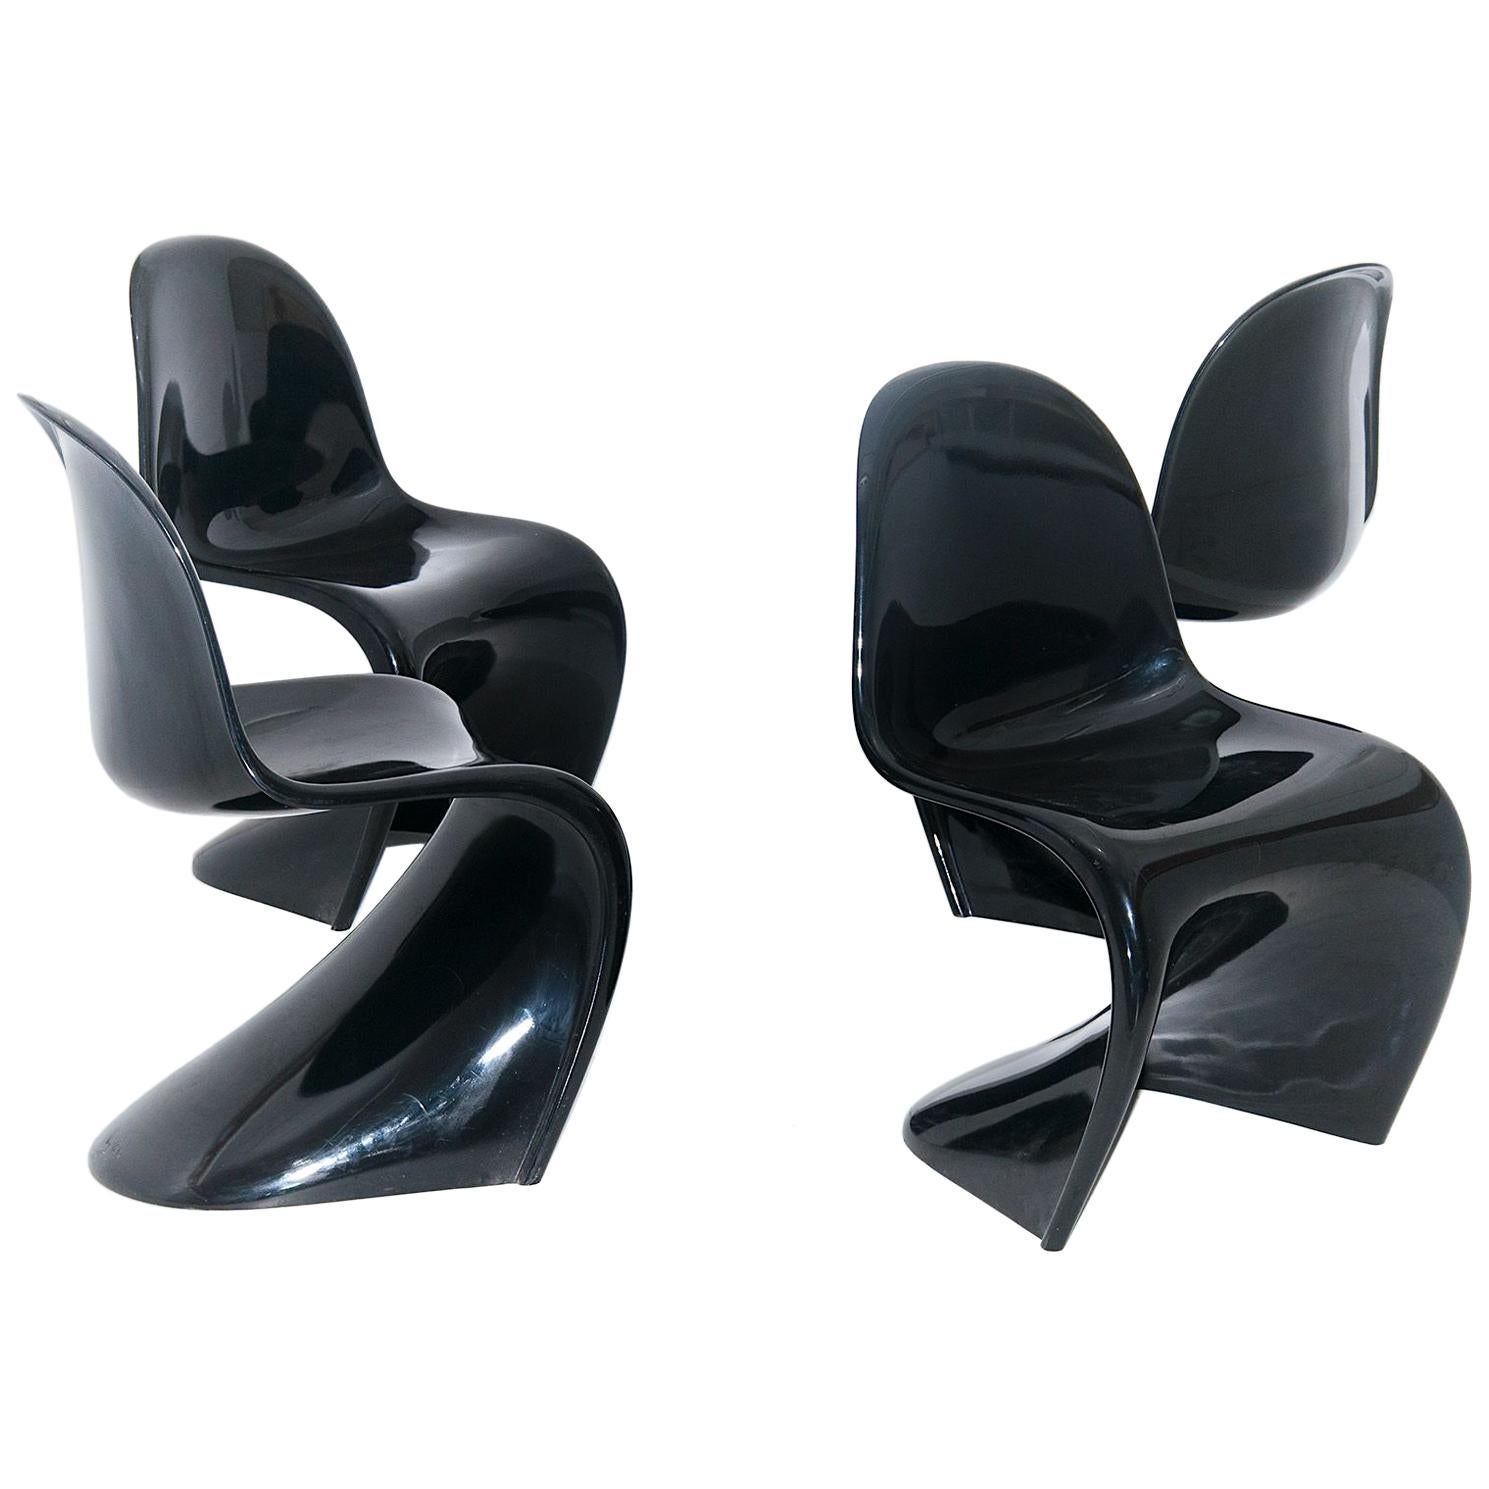 Vitra, Panton Classic Chairs, by Verner Panton, Black Lacquered, Set of Four